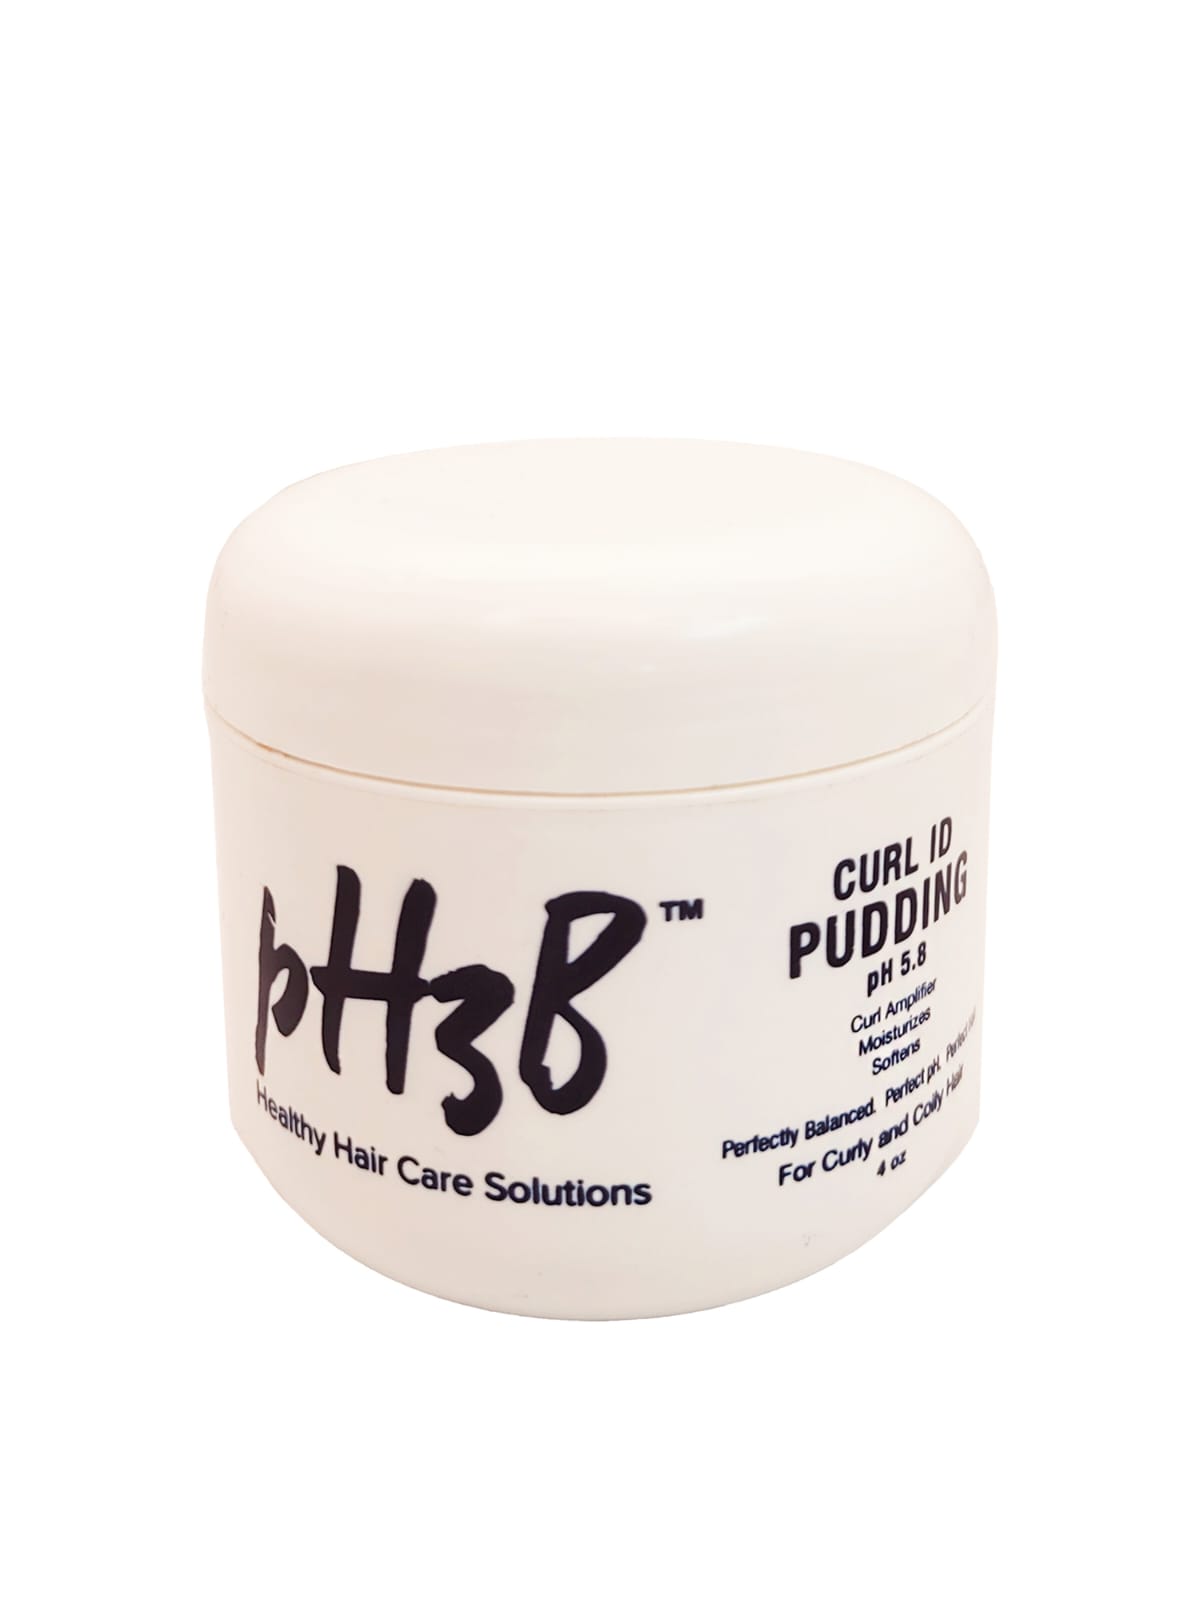 pH3B Curl ID Pudding (Pro Stylist Only)